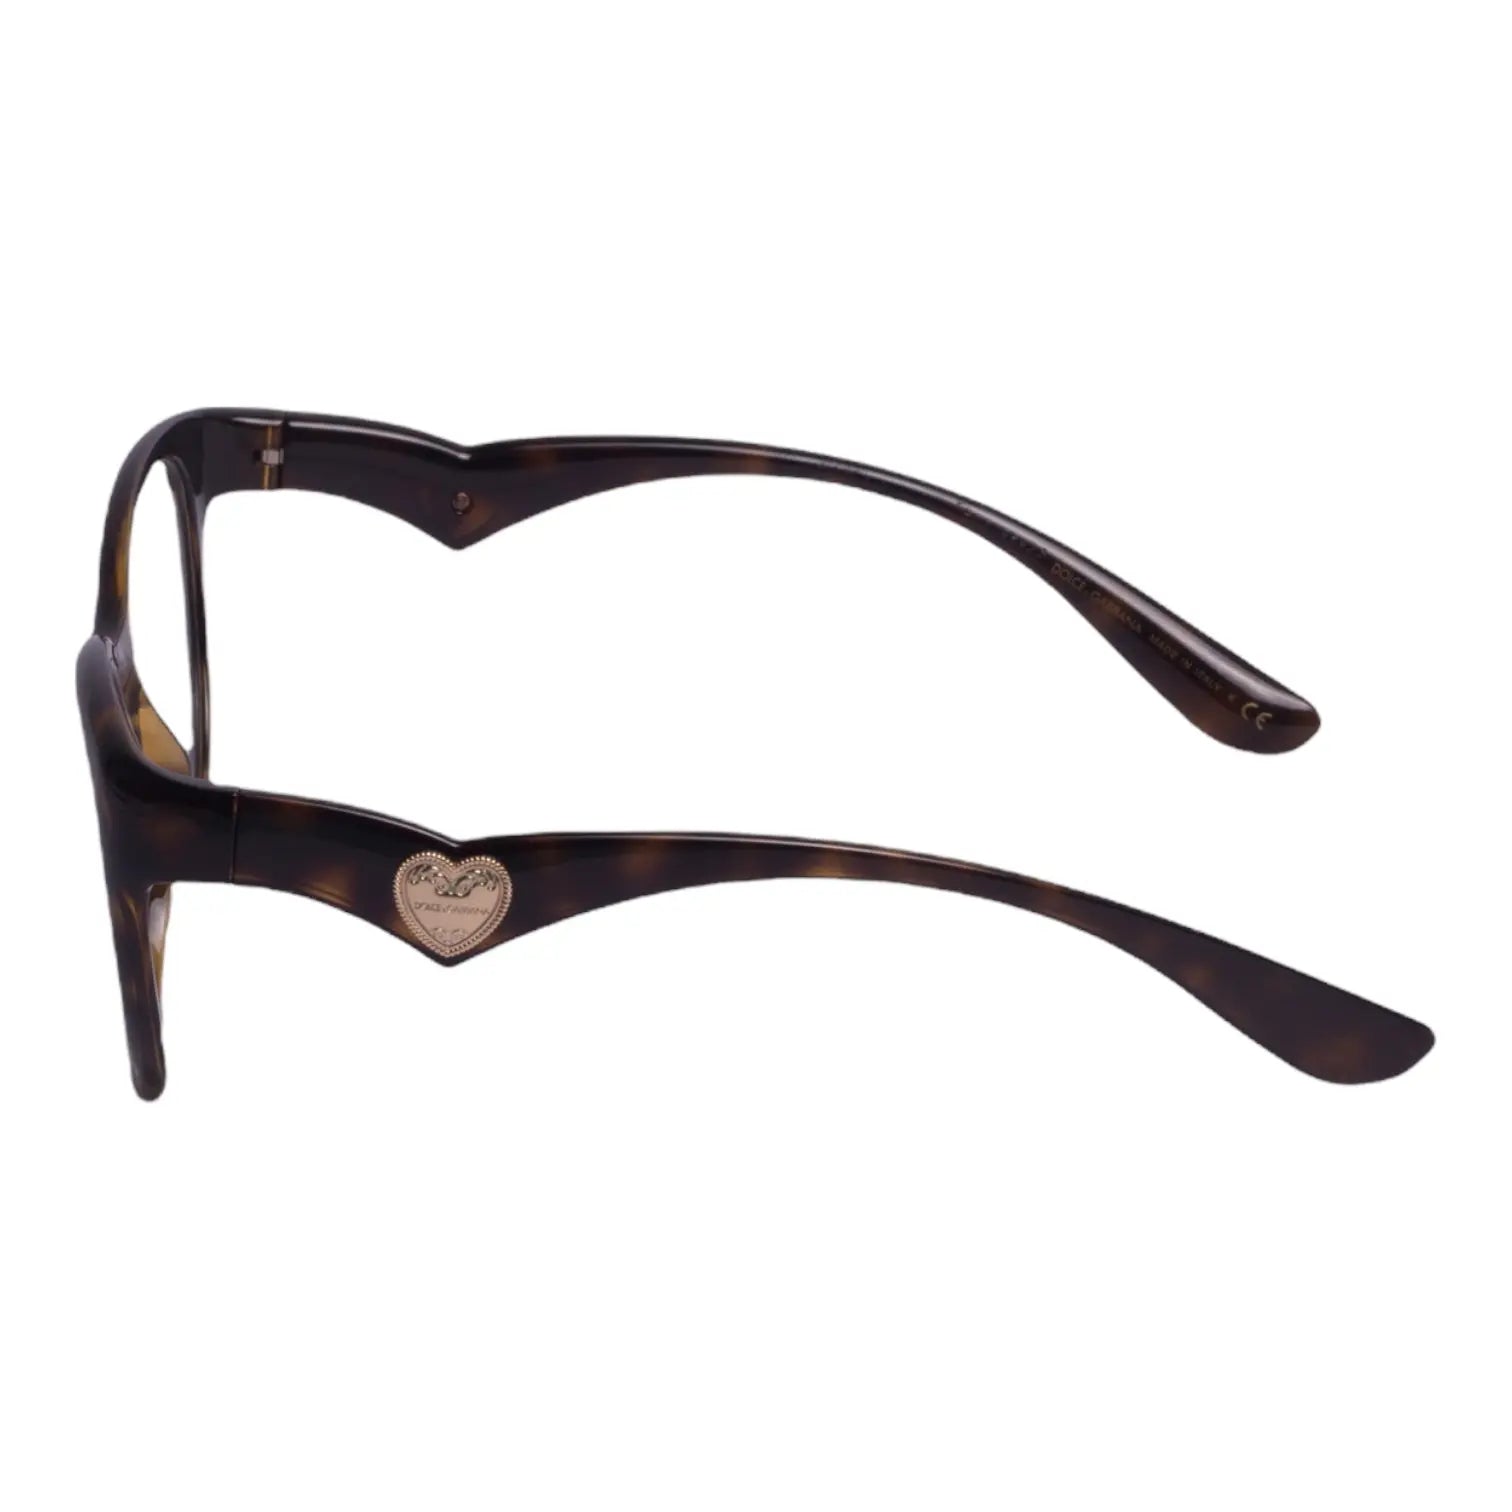 Dolce & Gabbana (D&G) DG 5069-51-502 EyeglassesLook brilliant every day in the Dolce &amp; Gabbana (D&amp;G) DG 5069-51-502 Eyeglasses. The perfect blend of style and comfort, these fashion-forward glasses are suEyeglasses